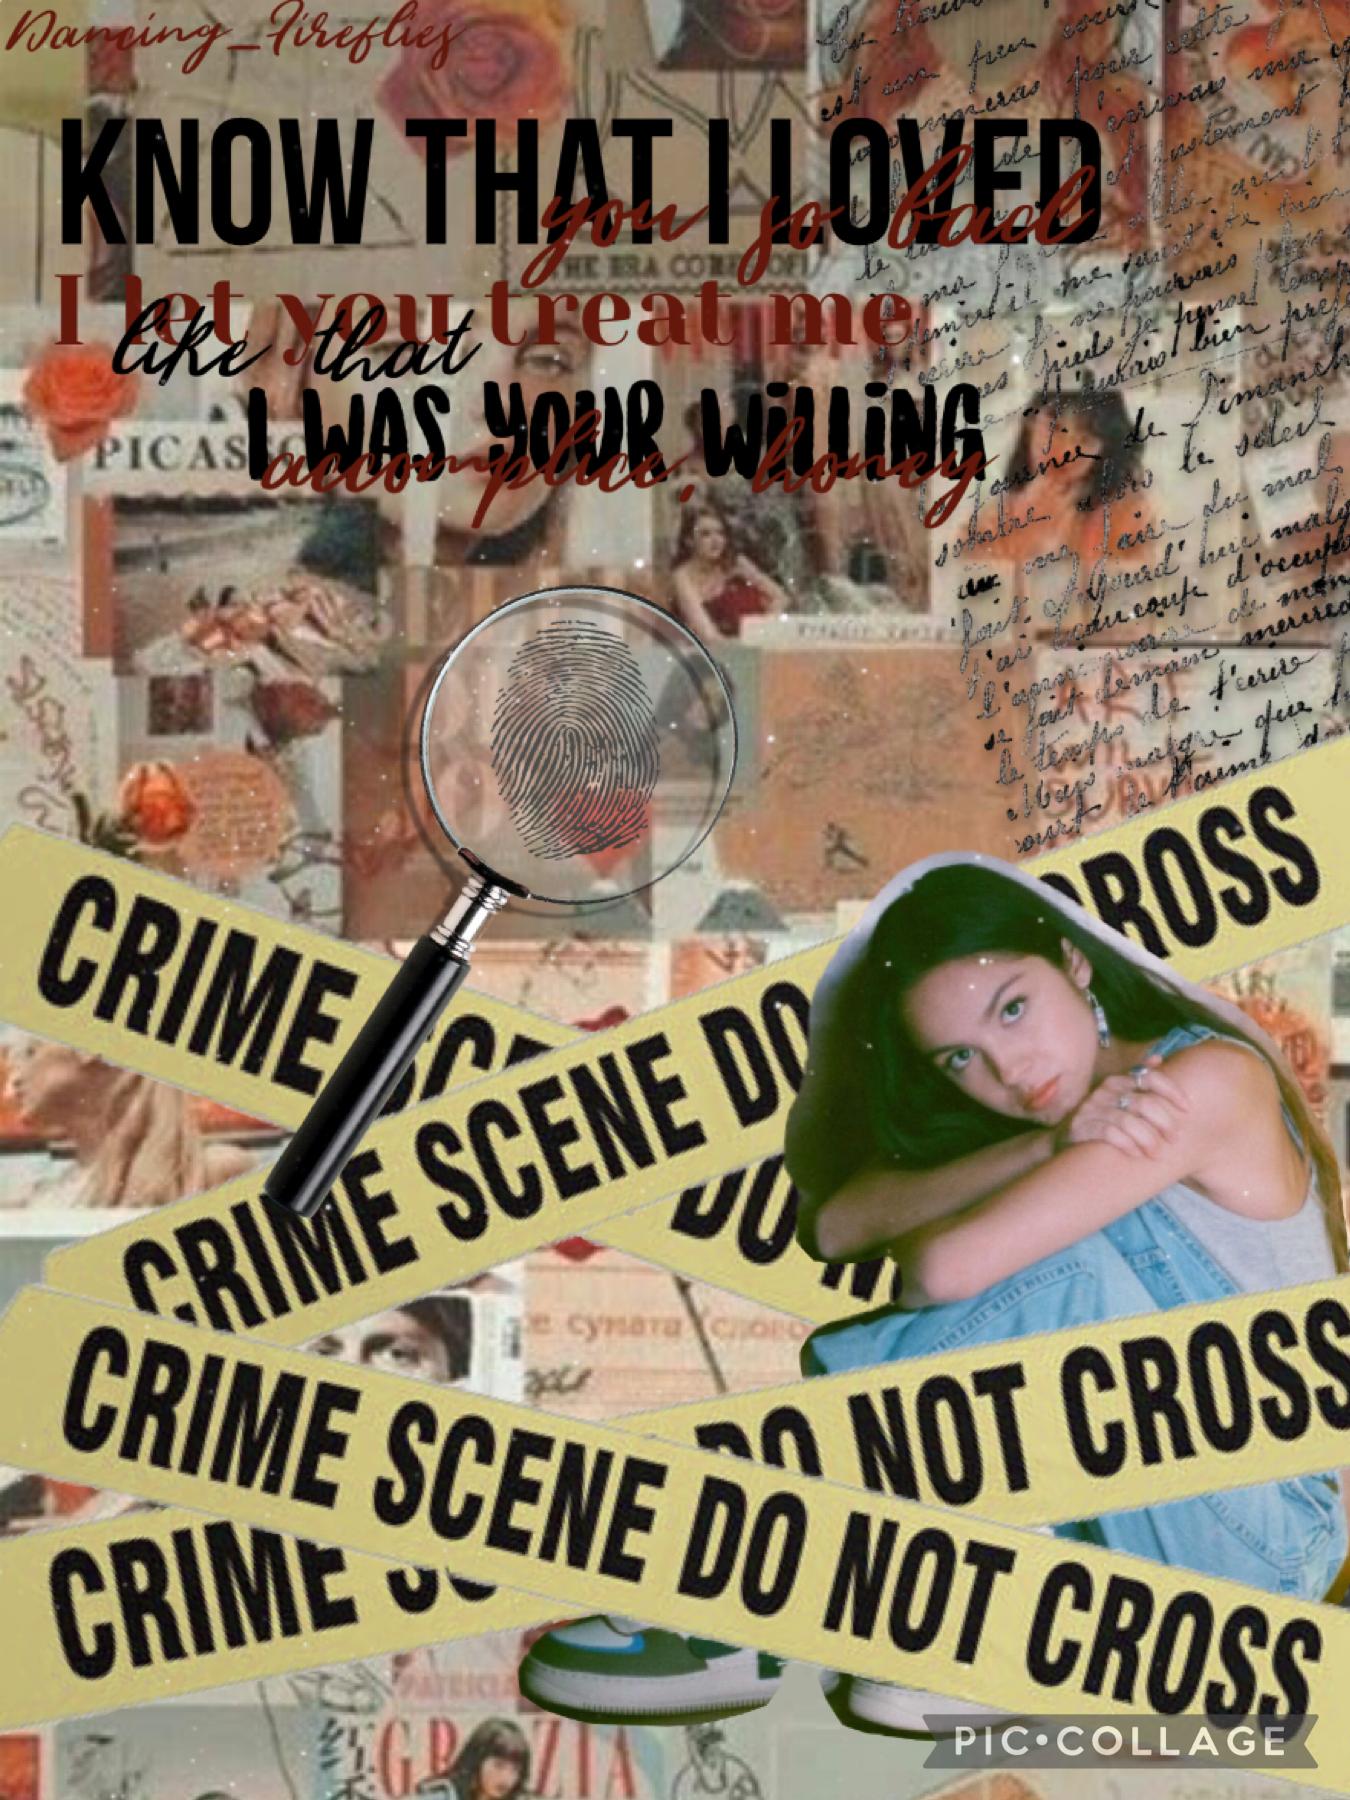 🖤TAP🖤
Olivia’s new album is so good you all need to listen to it! I based this collage after her new song beautiful crimes. (5/21/21) Qotd: what is your favorite song in the album? Aotd: 1 step forward, and 3 steps back!